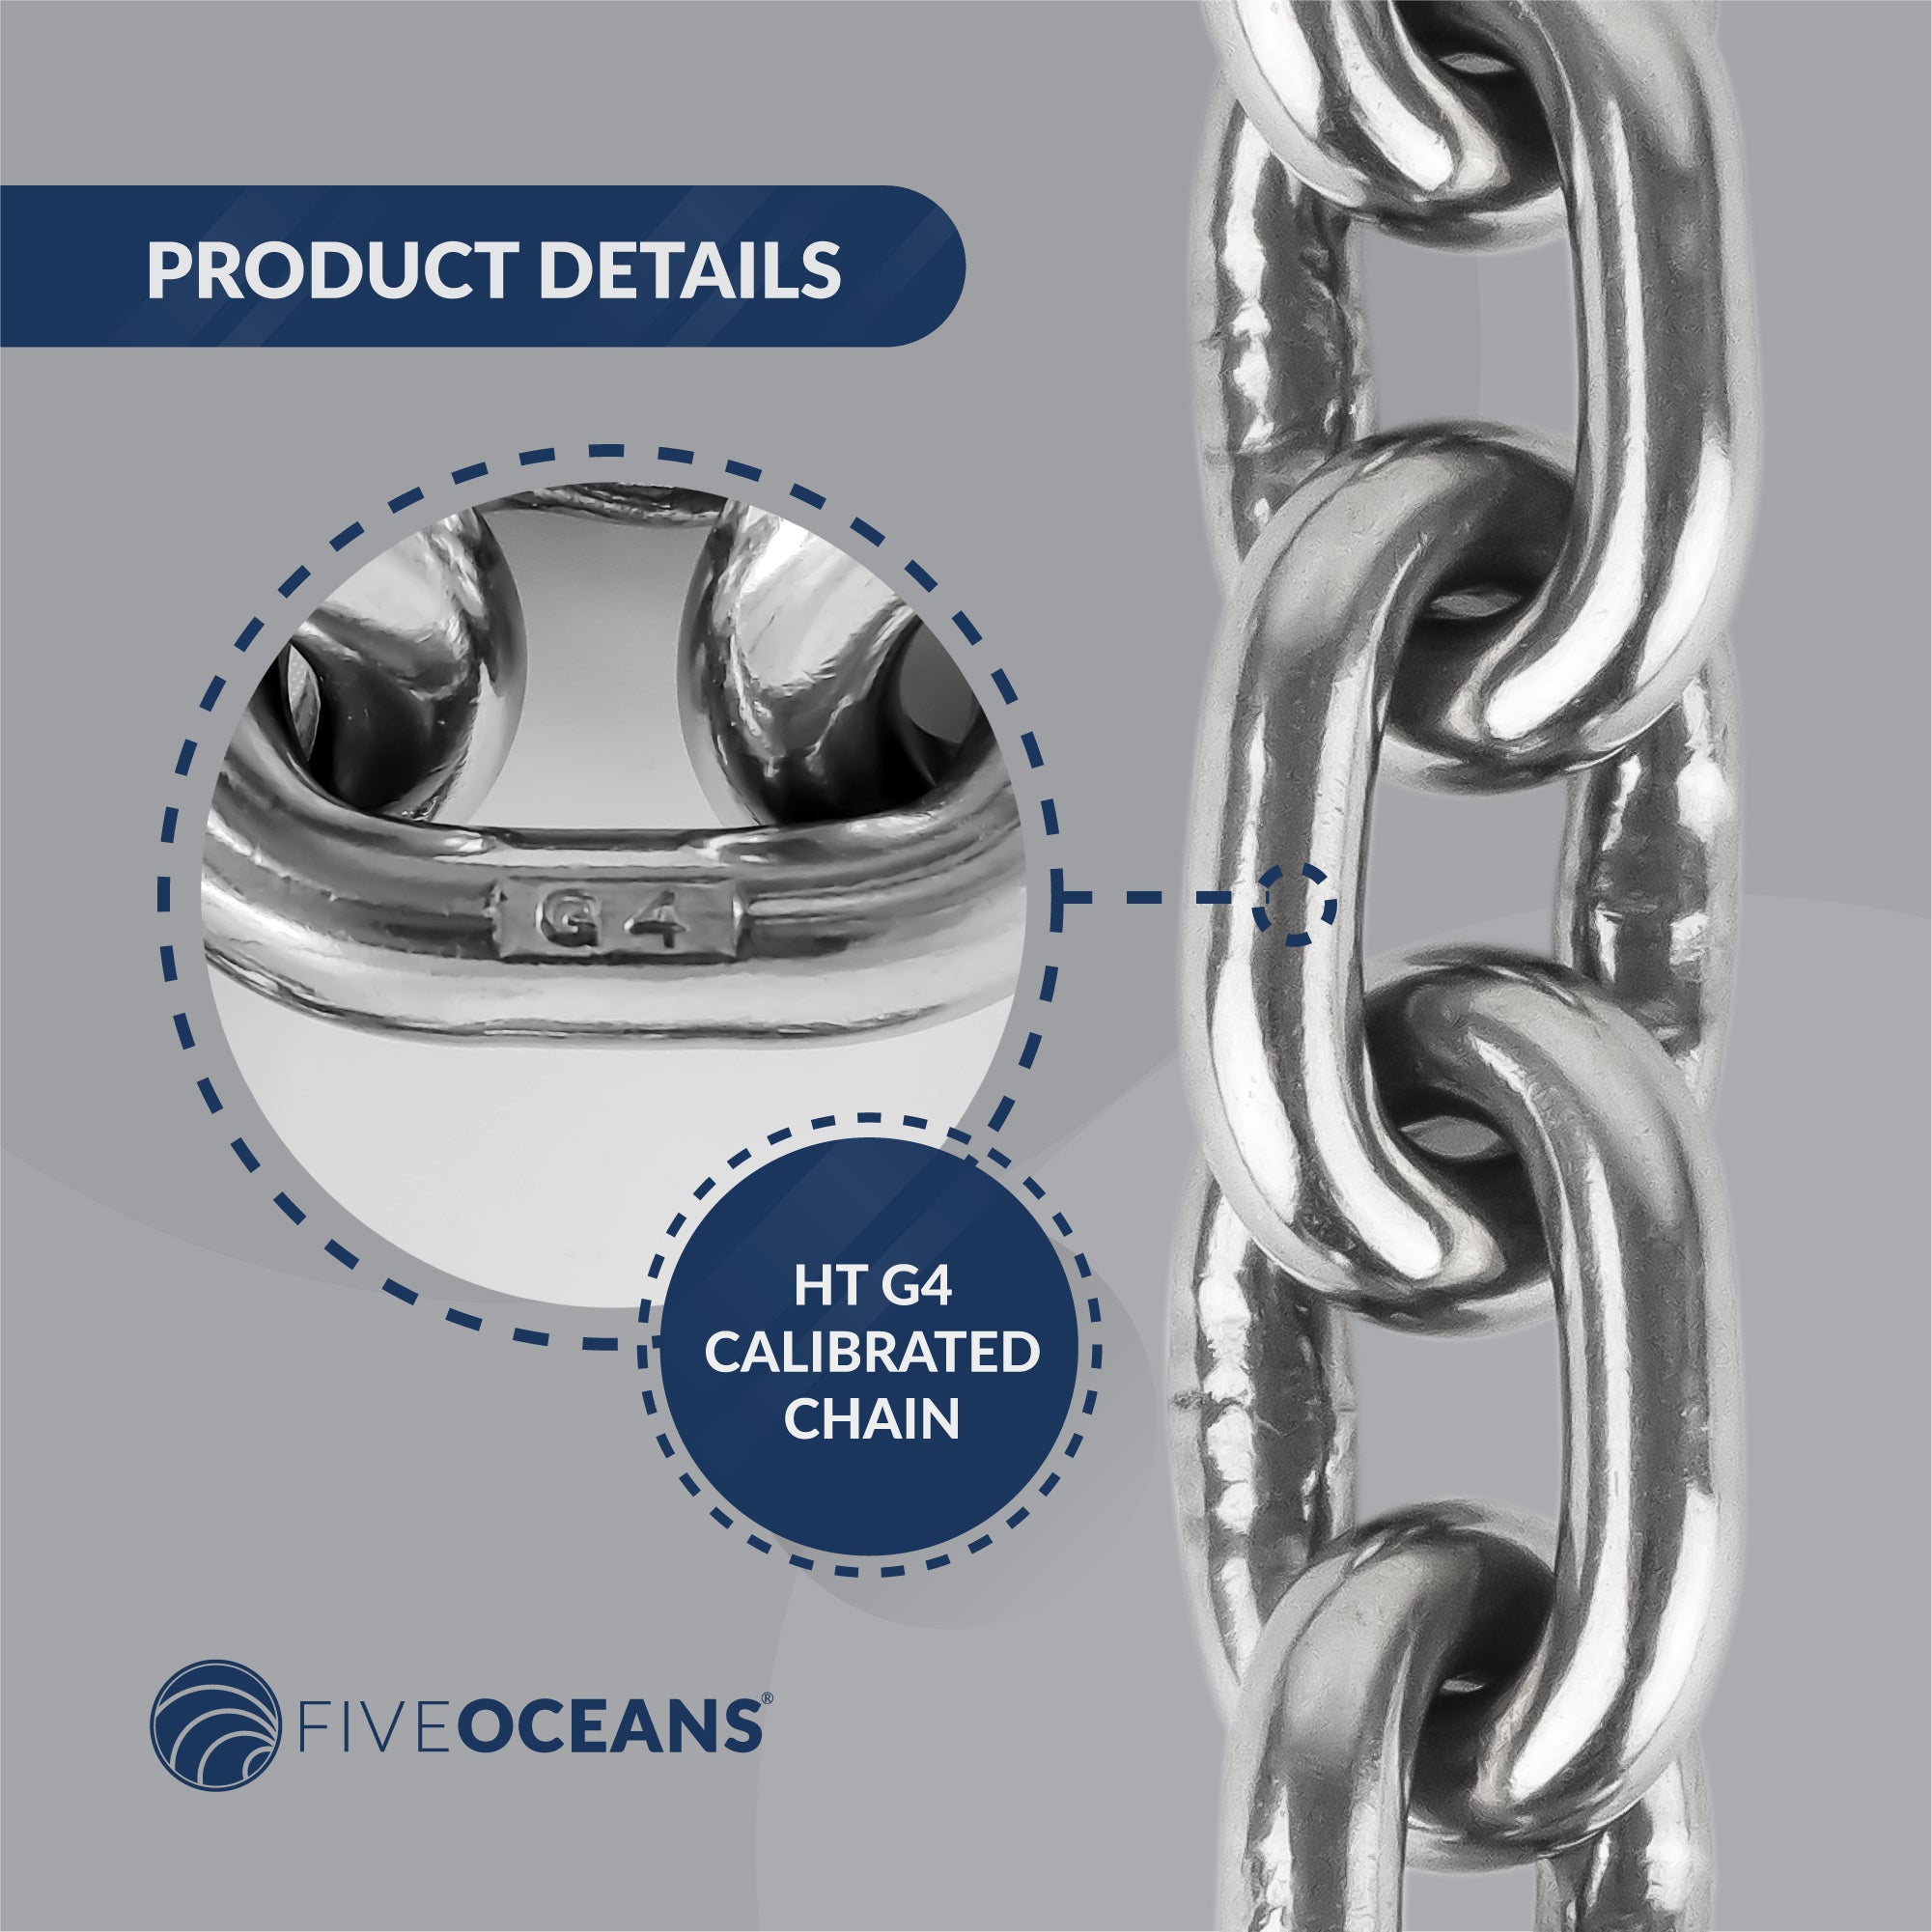 Boat Anchor Lead Chain with Shackles, 5/16" x 15', HTG4 Stainless Steel - FO4493-S15